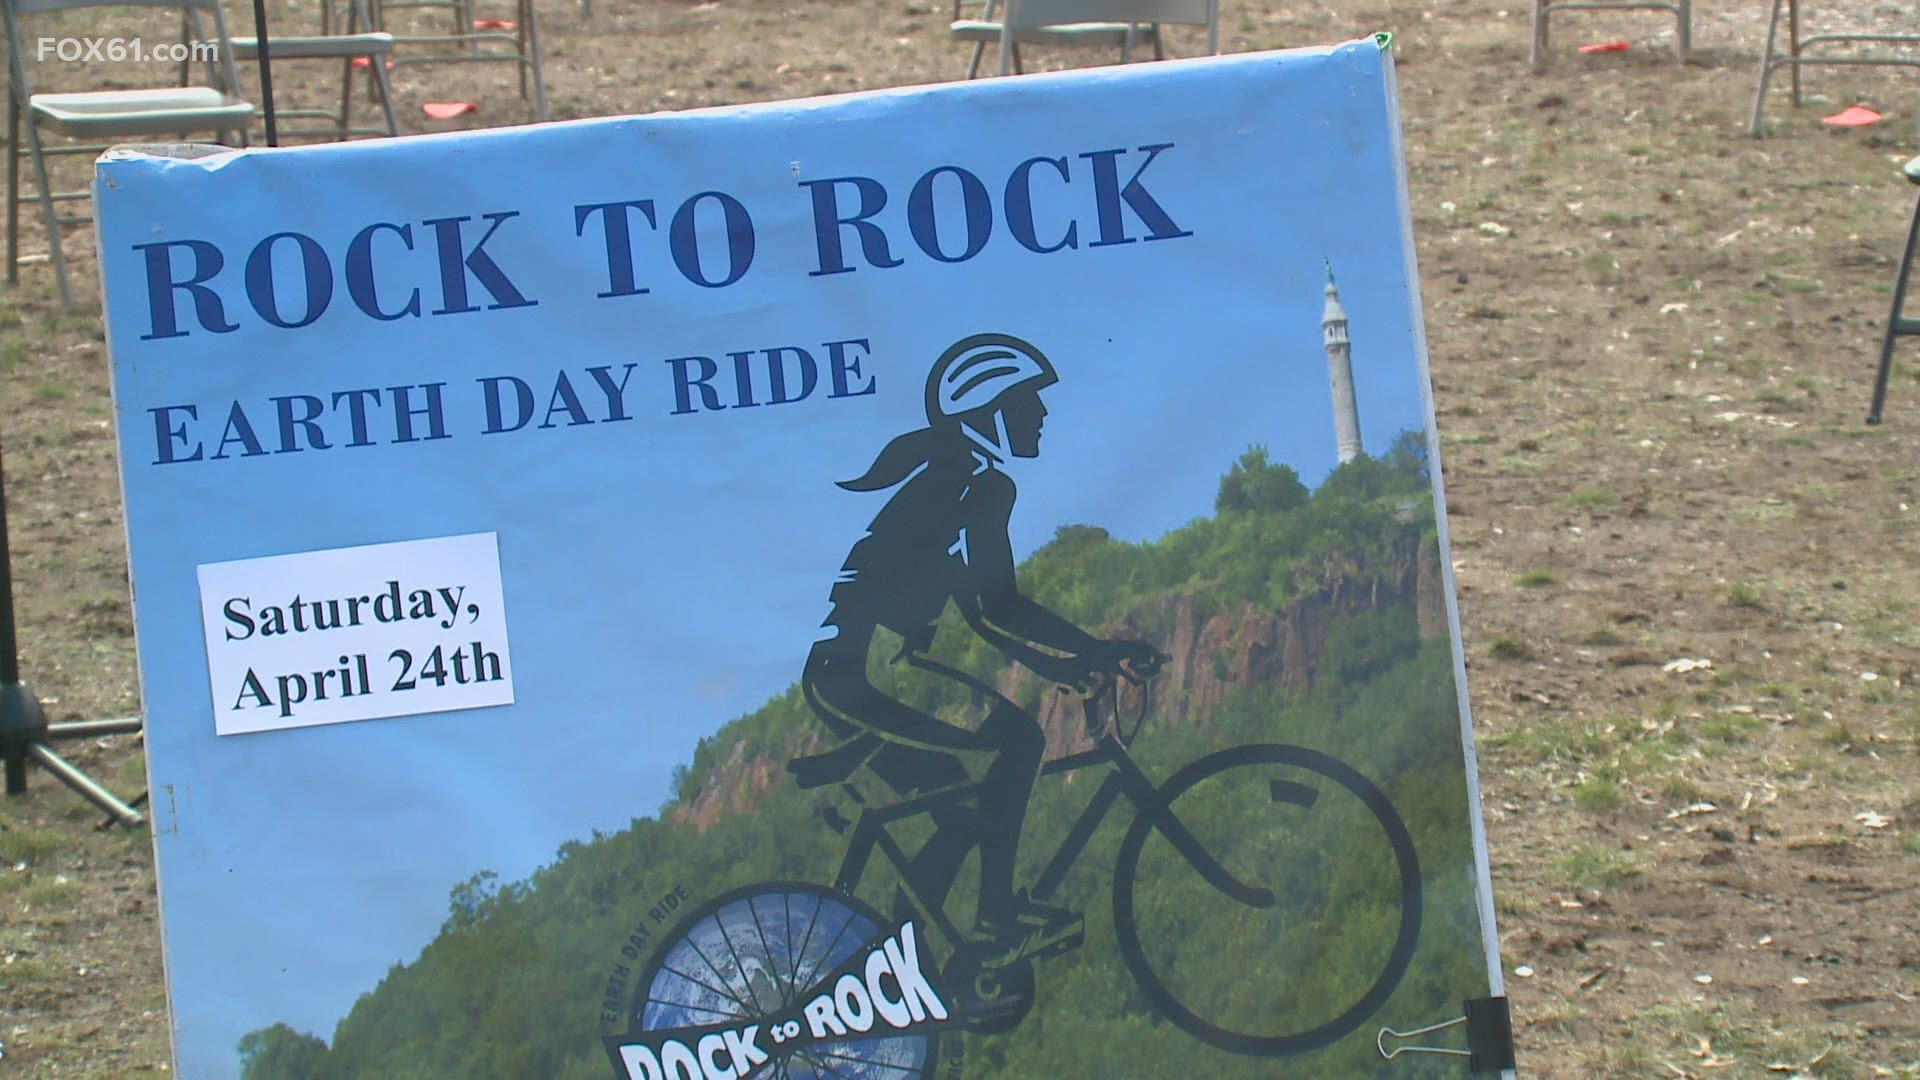 Those registered can cycle, walk or run across the region in support of their favorite nonprofit. Over 13 years, the event has raised about $2 million.